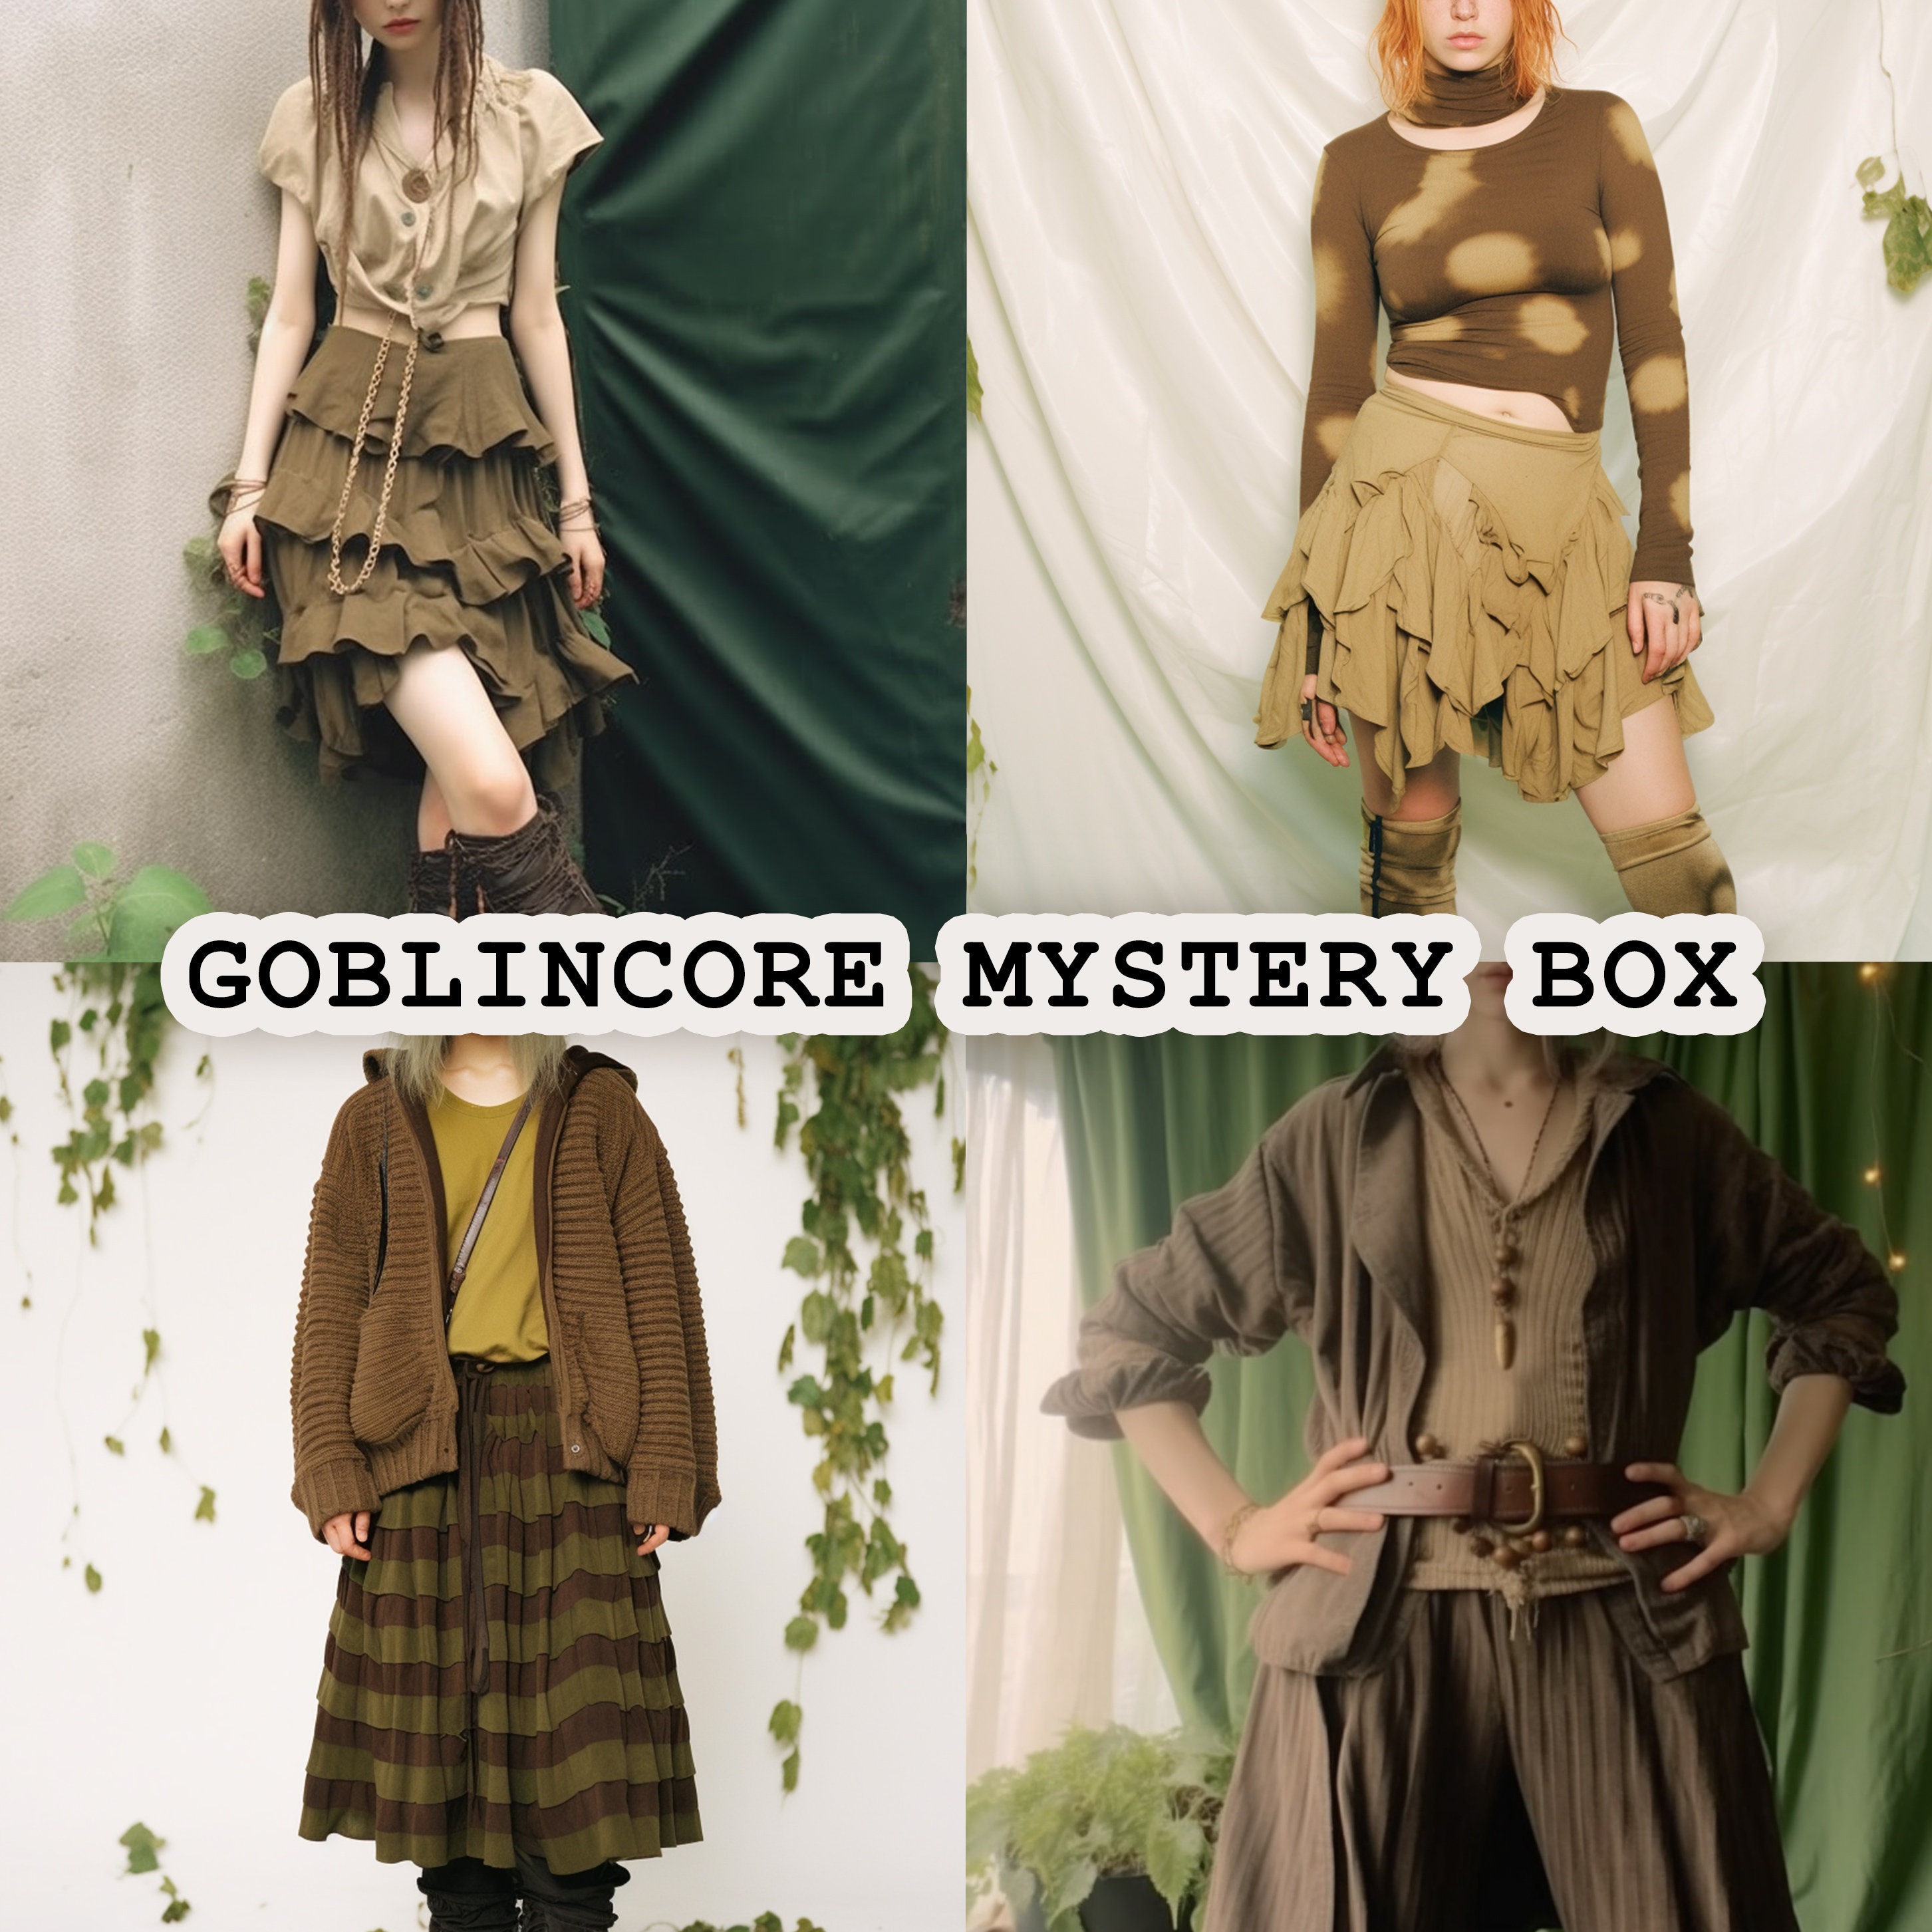 Fairycore Thrifted Mystery Clothing Bundle